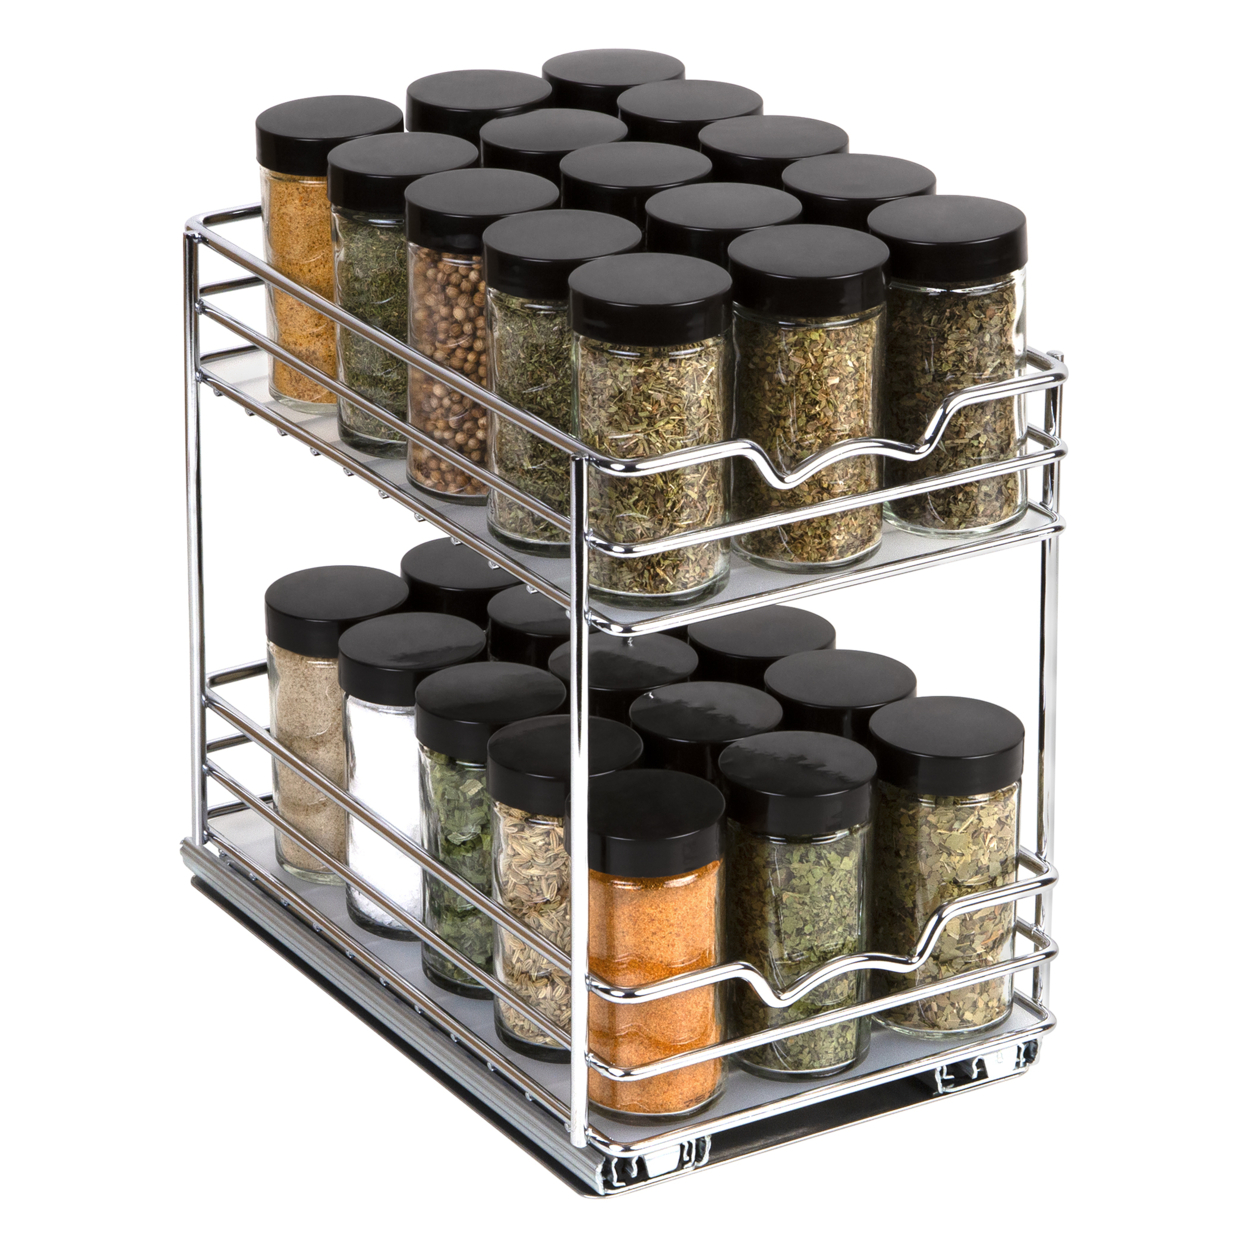 Spice Rack Organizer For Cabinet - Pull Out Double Tier Spice Rack 6-3/8W X 10-3/8D